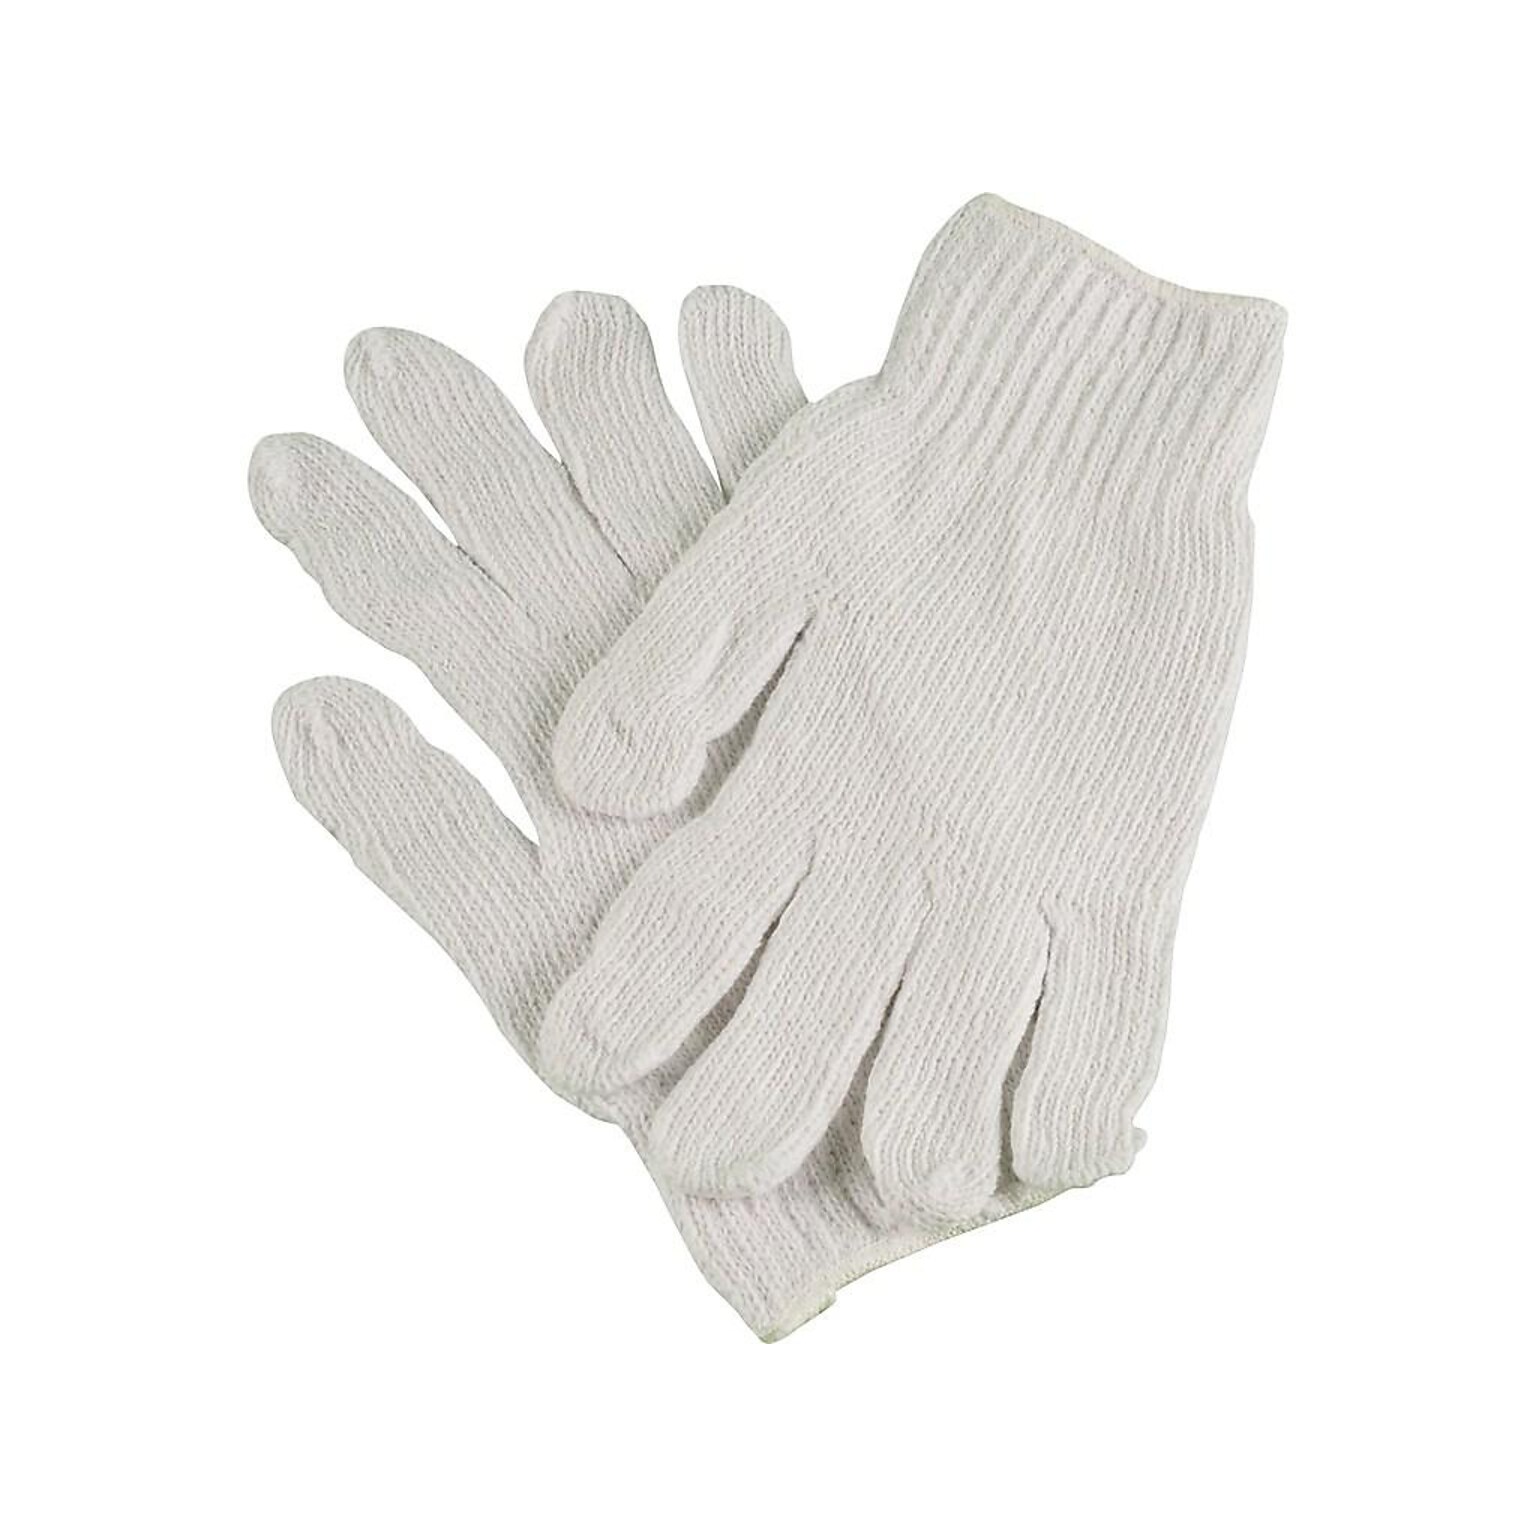 Ambitex Pro Cotton/Polyester Gloves, Natural White, 12 Pair/Pack (CTPS400LG/NLW)